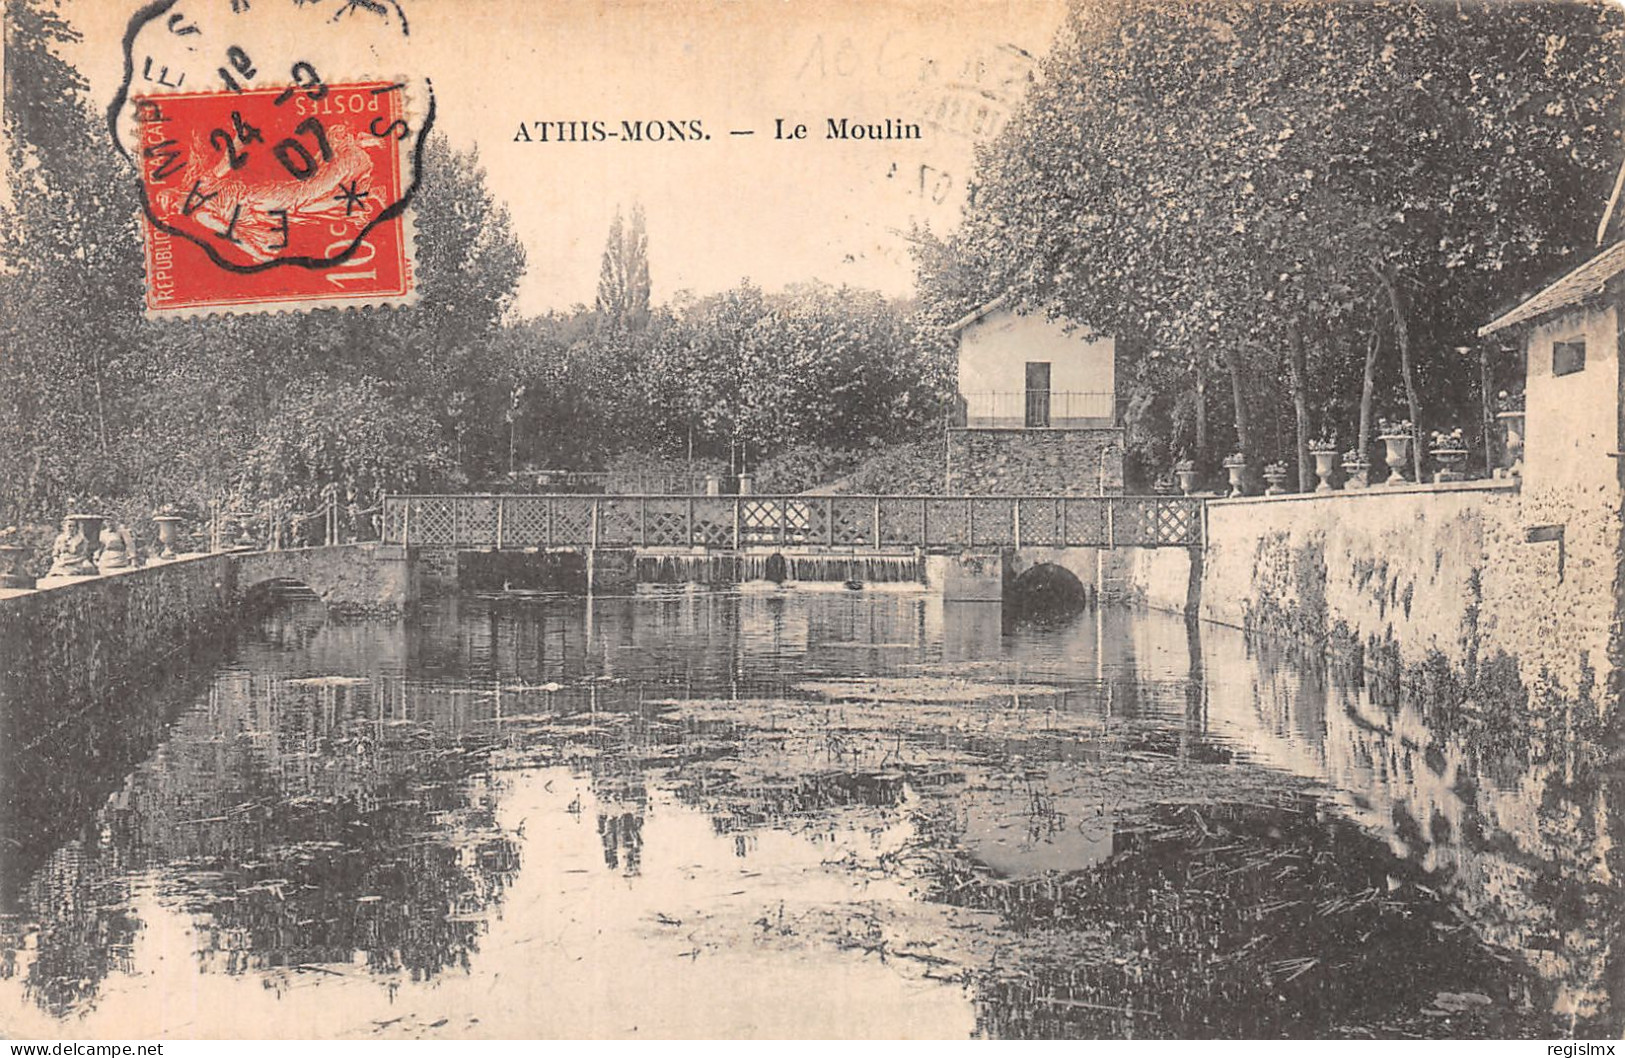 91-ATHIS MONS-N°2144-C/0143 - Athis Mons